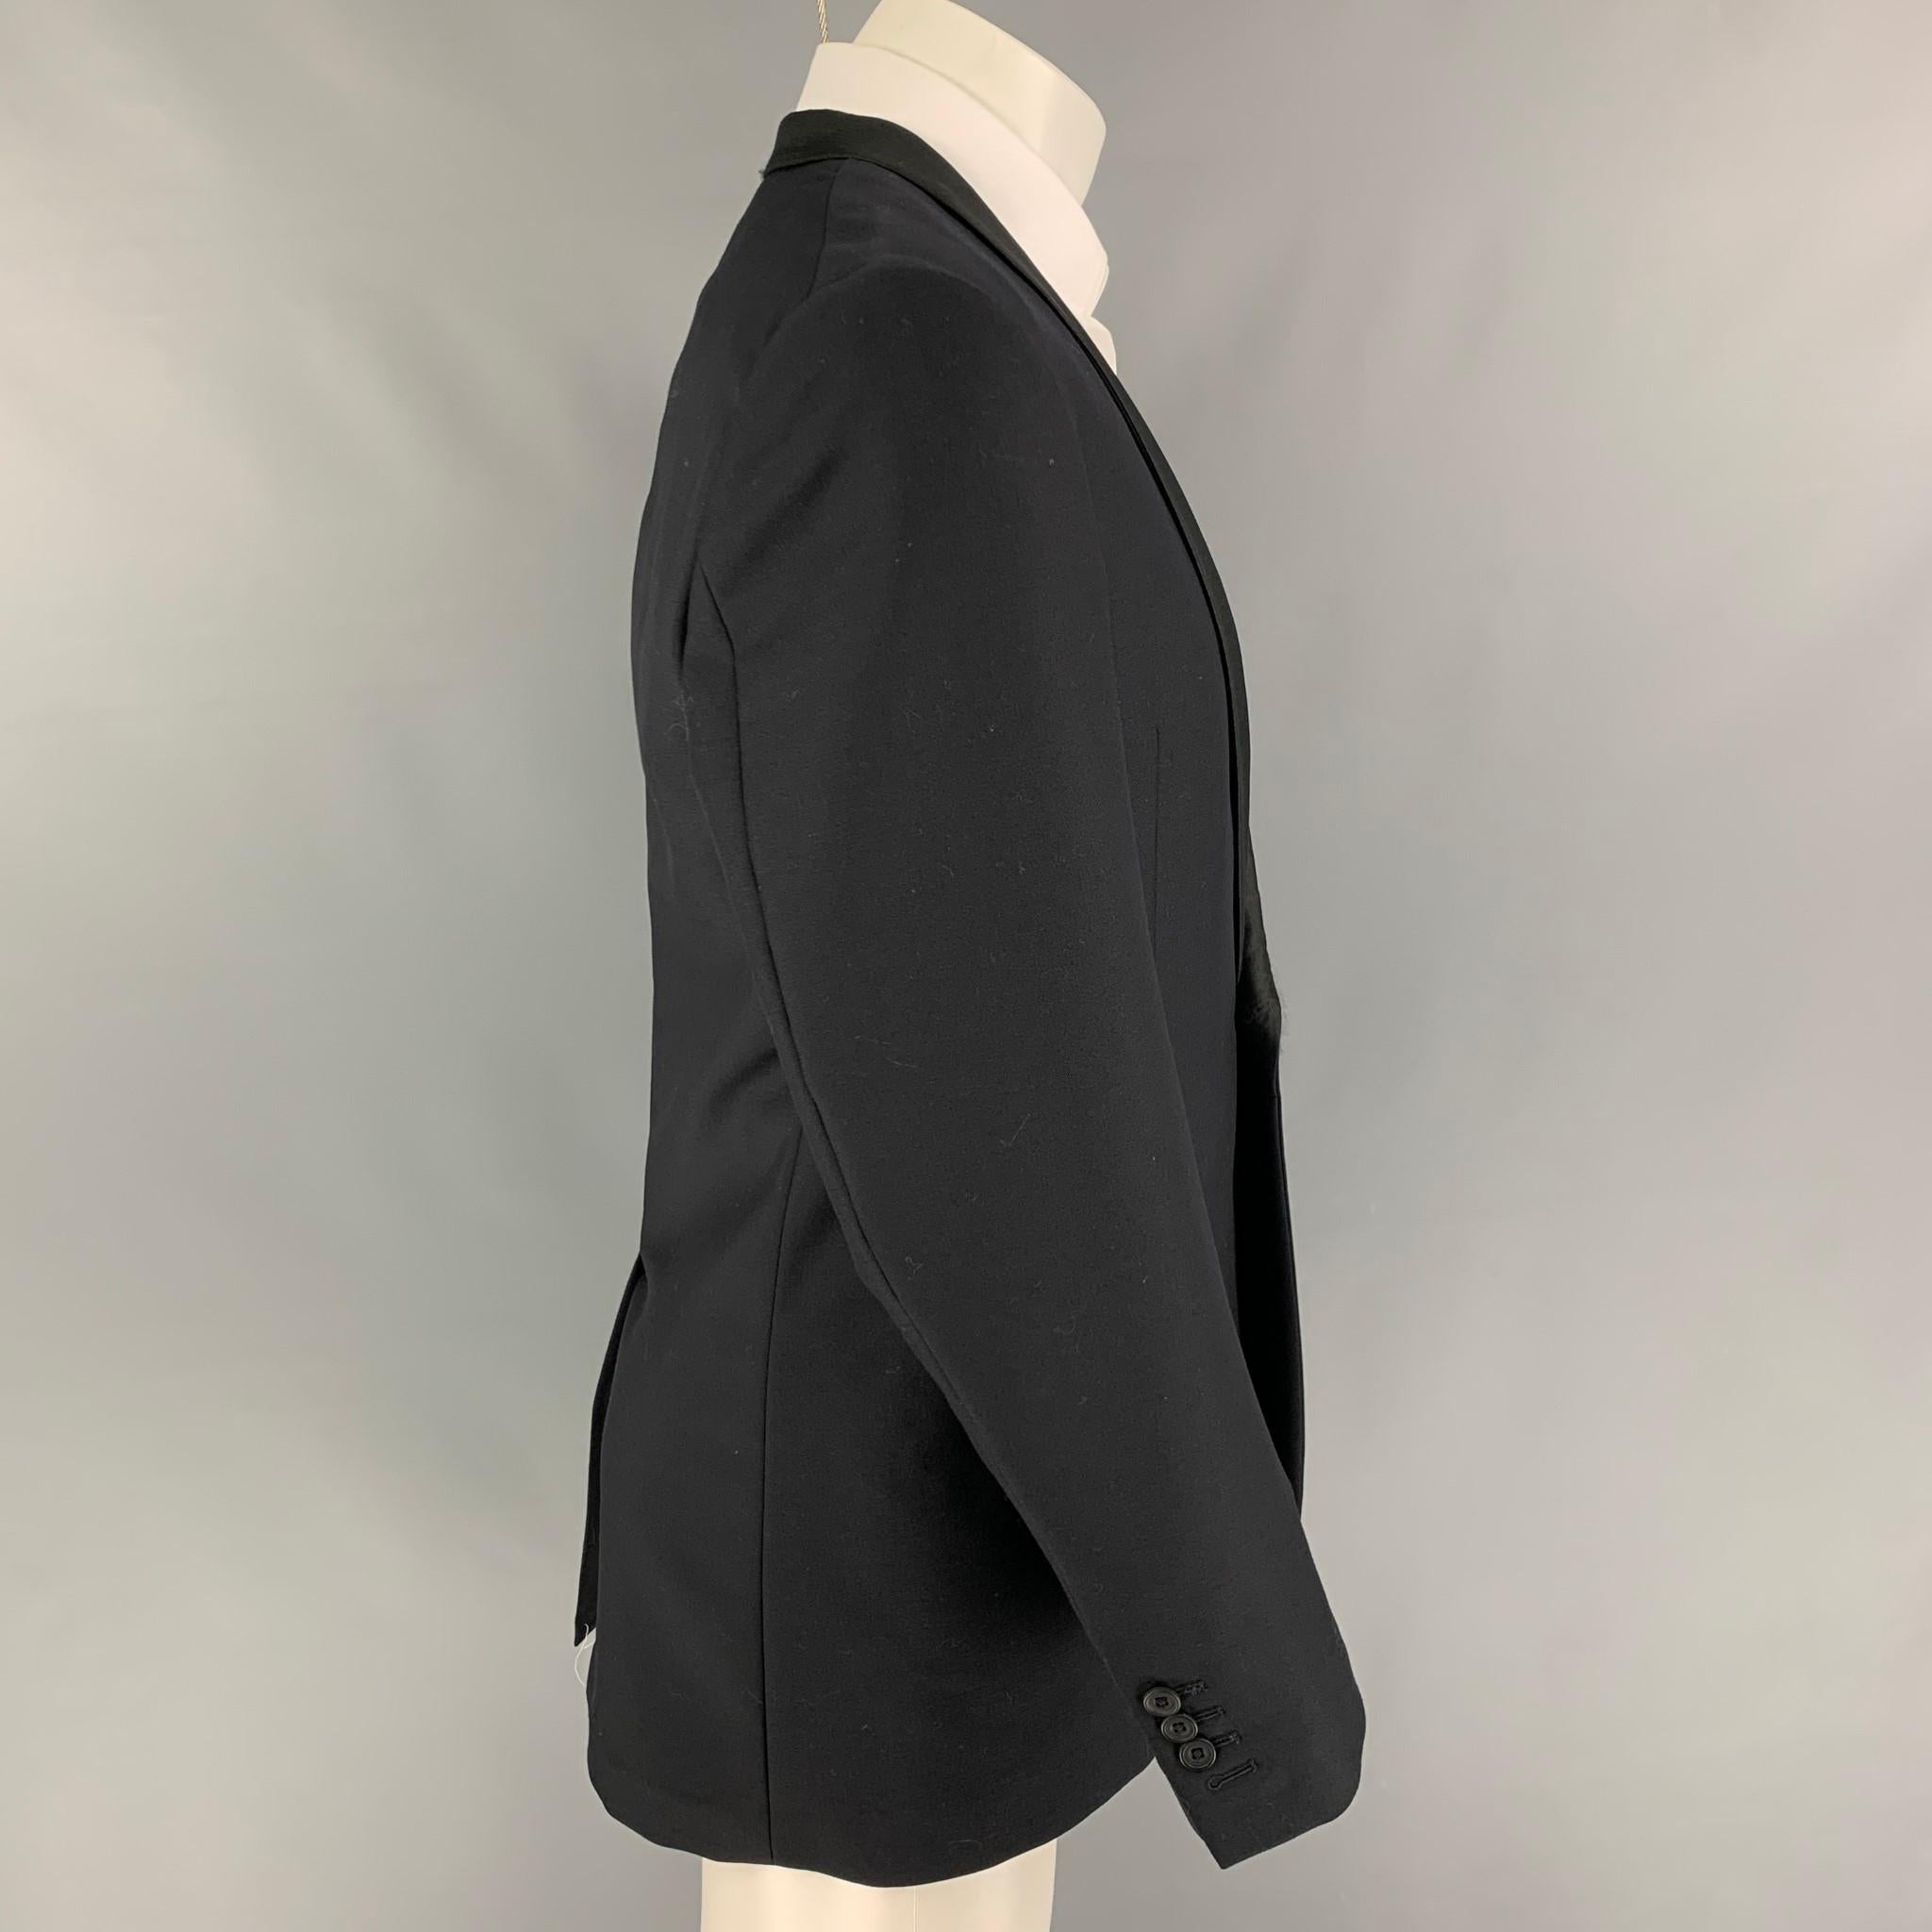 AQUASCUTUM sport coat comes in a black wool with a full liner featuring a shawl collar, slit pockets, single back vent, and a single button closure. 

Very Good Pre-Owned Condition.
Marked: 40 R

Measurements:

Shoulder: 17.5 in.
Chest: 40